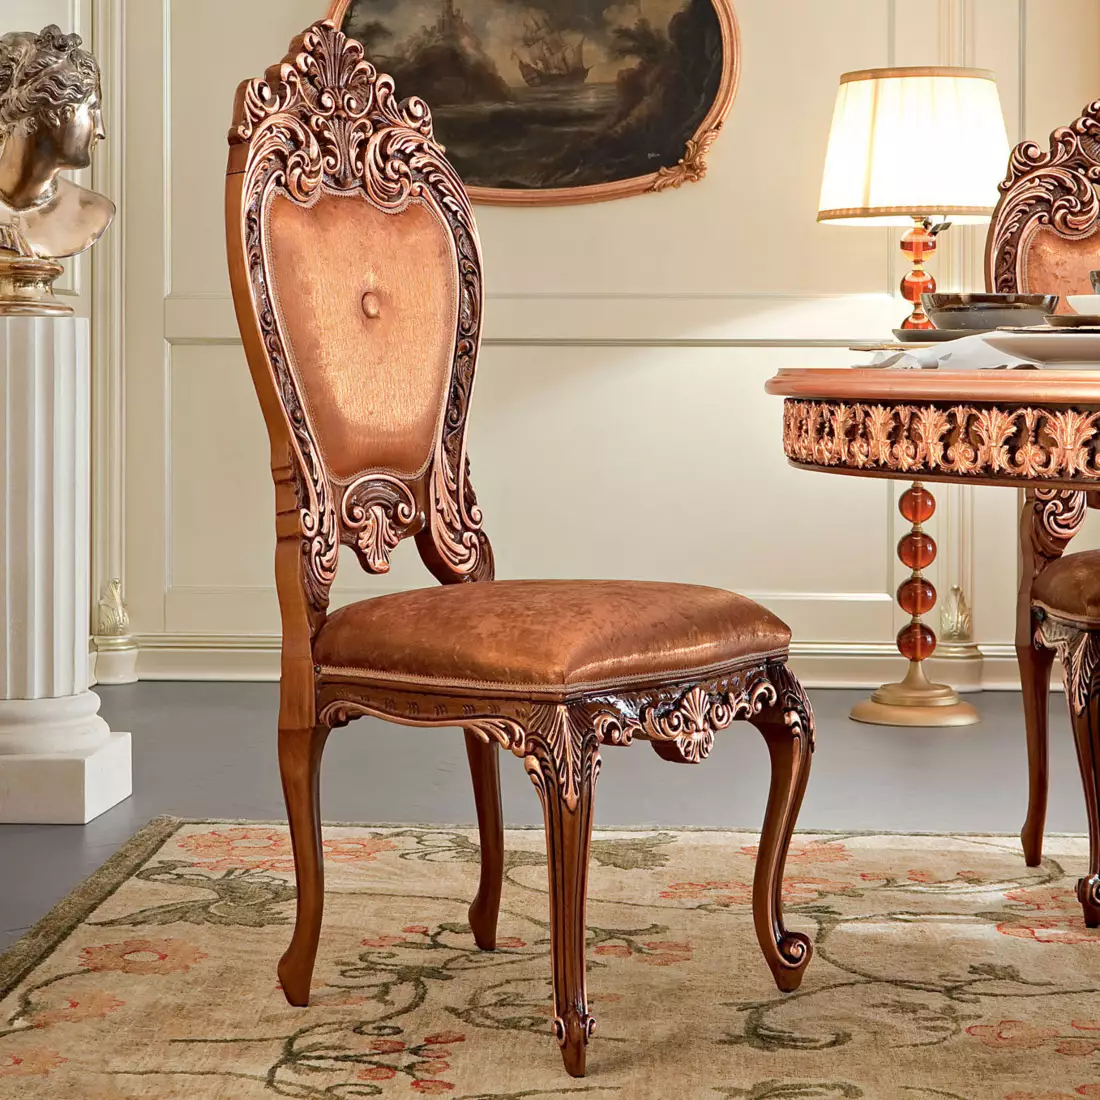 Upholstered-and-carved-chair-finished-with-copper-leaf-applications-Bella-Vita-collection-Modenese-Gastonehrtgrfesdws